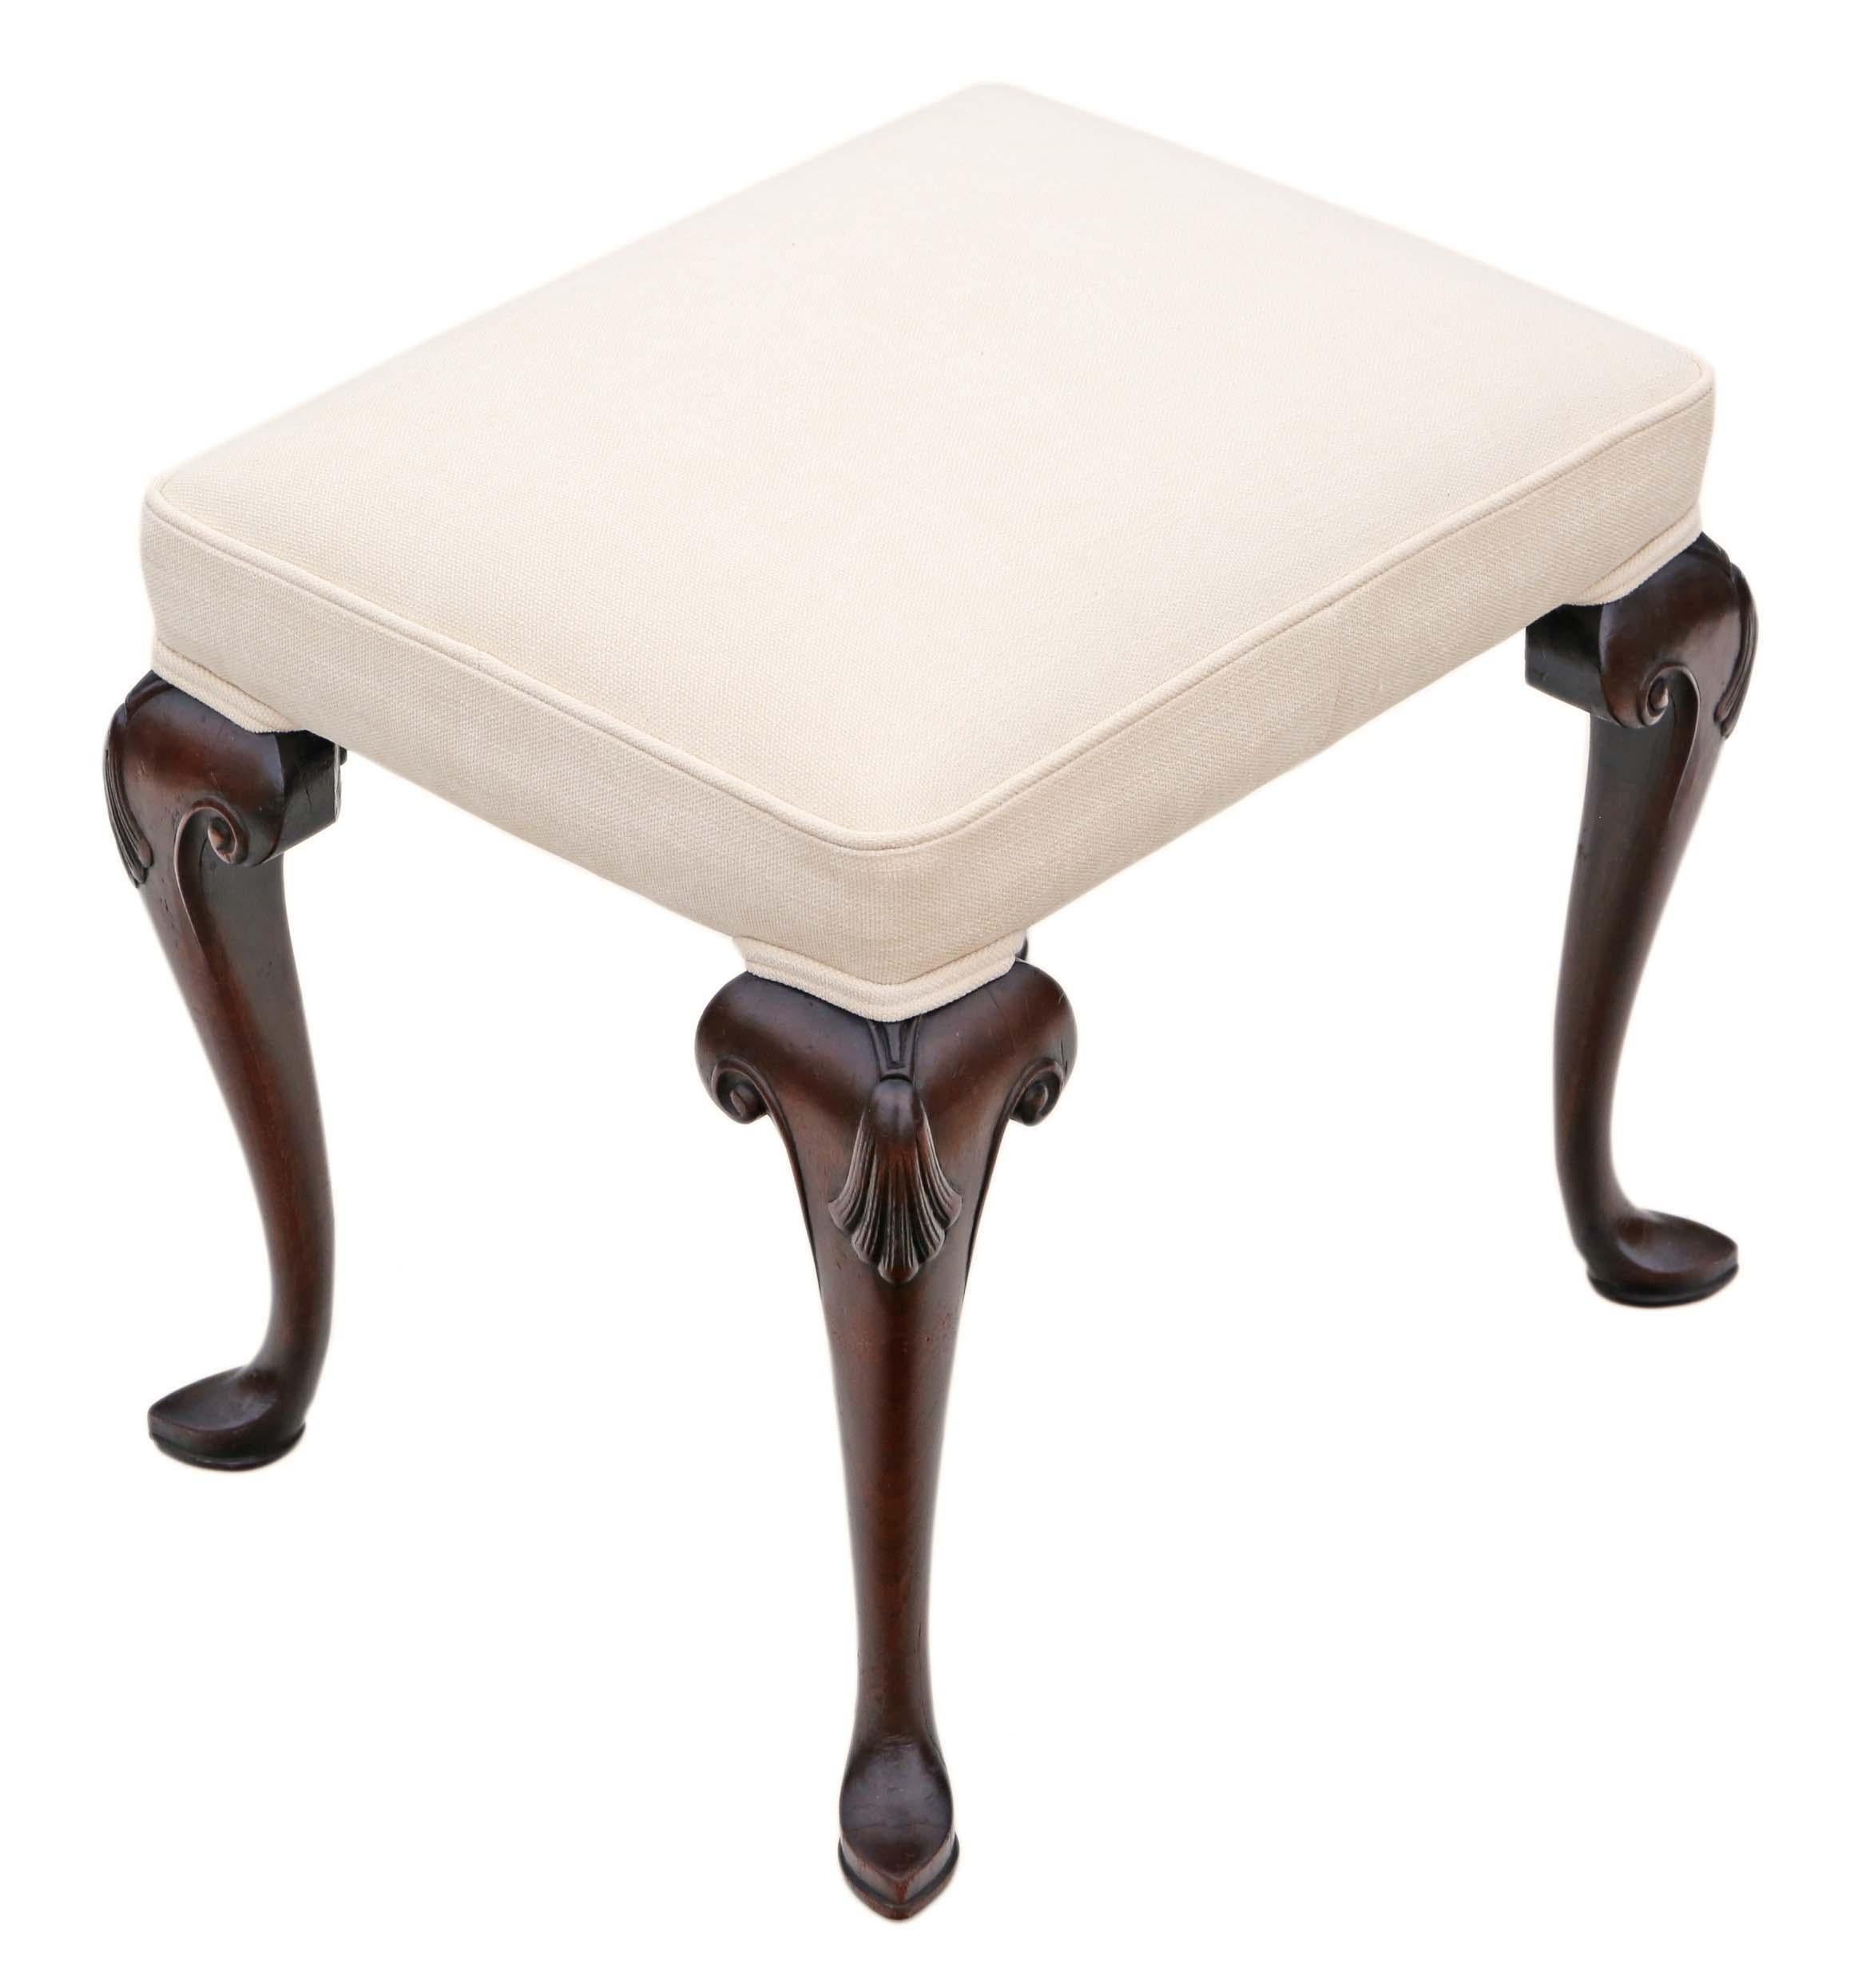 Fabric Antique George II Mahogany Stool from the Mid-18th Century of Quality Craftsmans For Sale